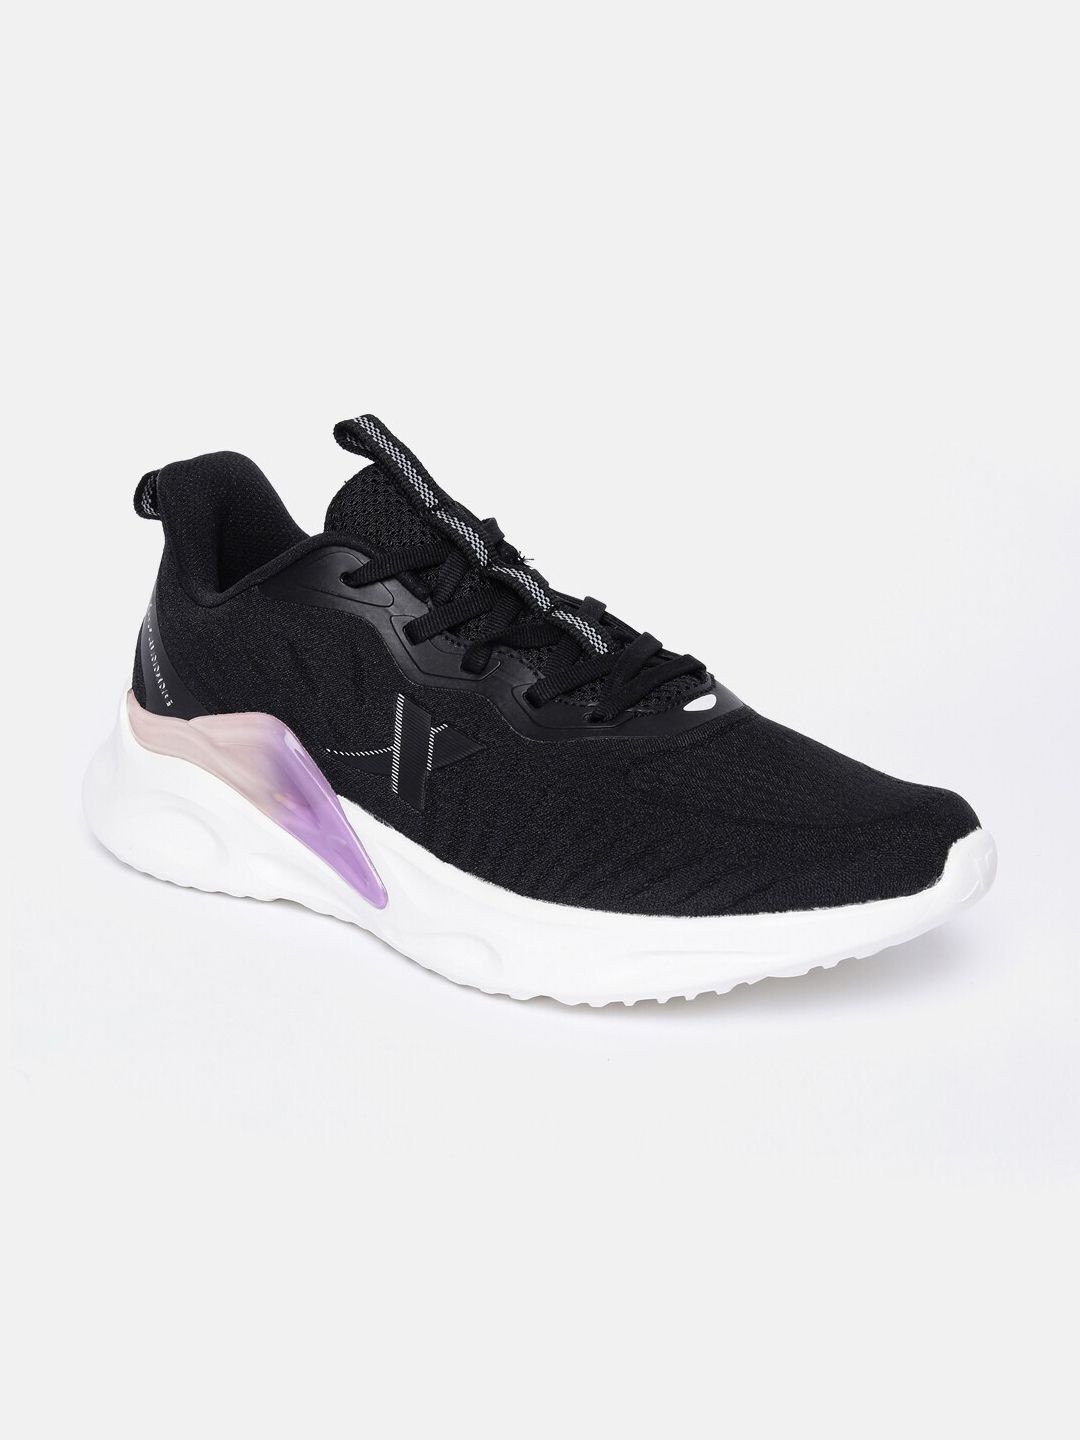 Xtep Women Black Textile Running Non-Marking Shoes Price in India